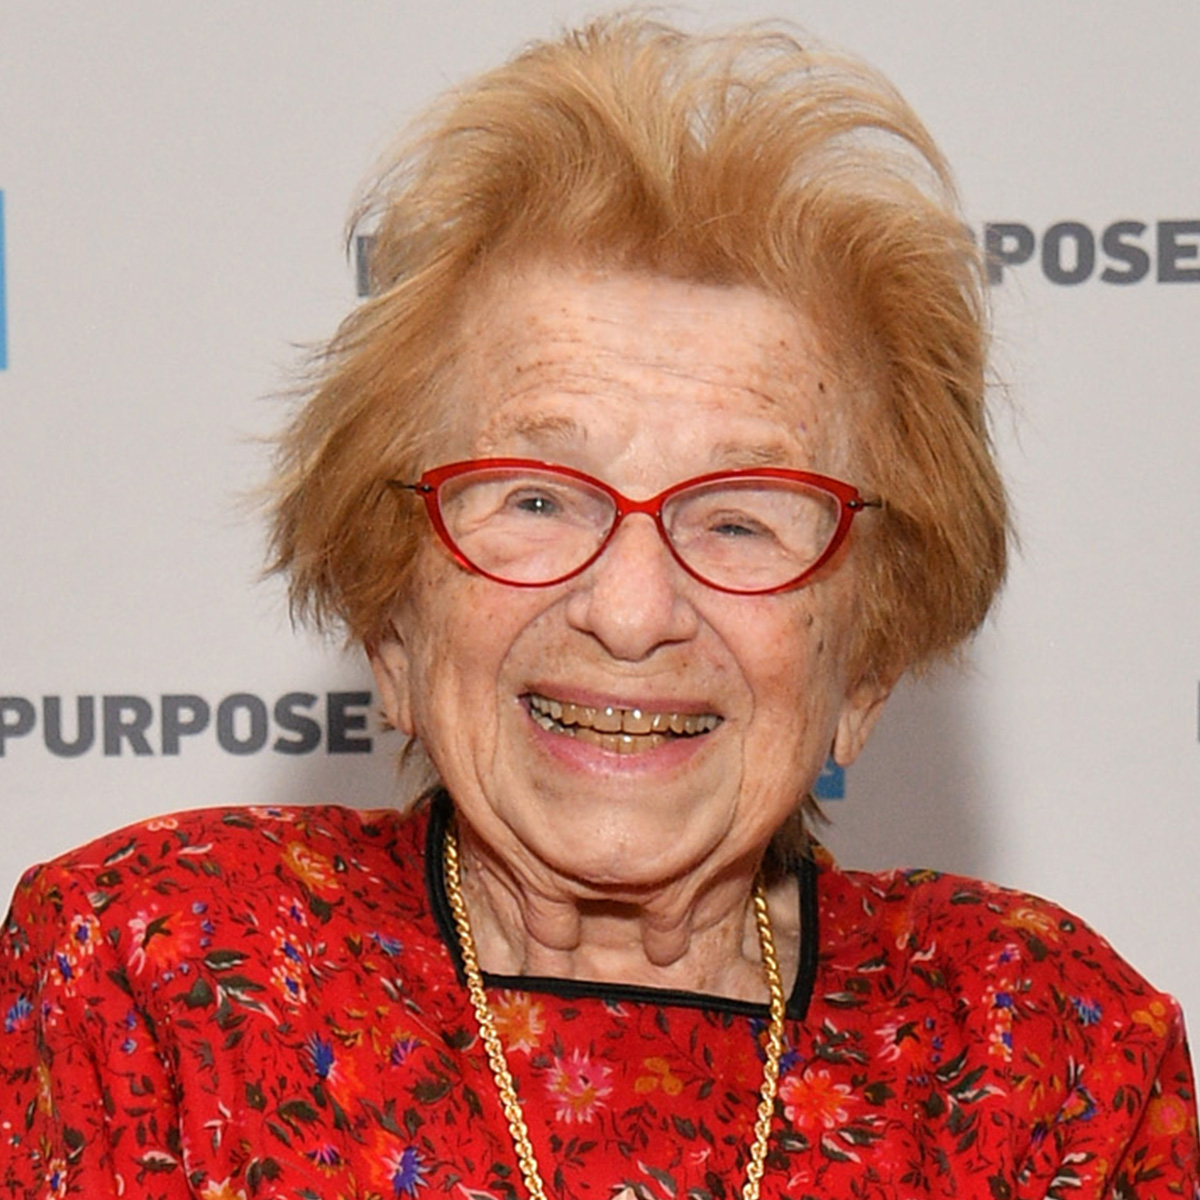 Renowned Sex Therapist Dr. Ruth Westheimer Dead at 96